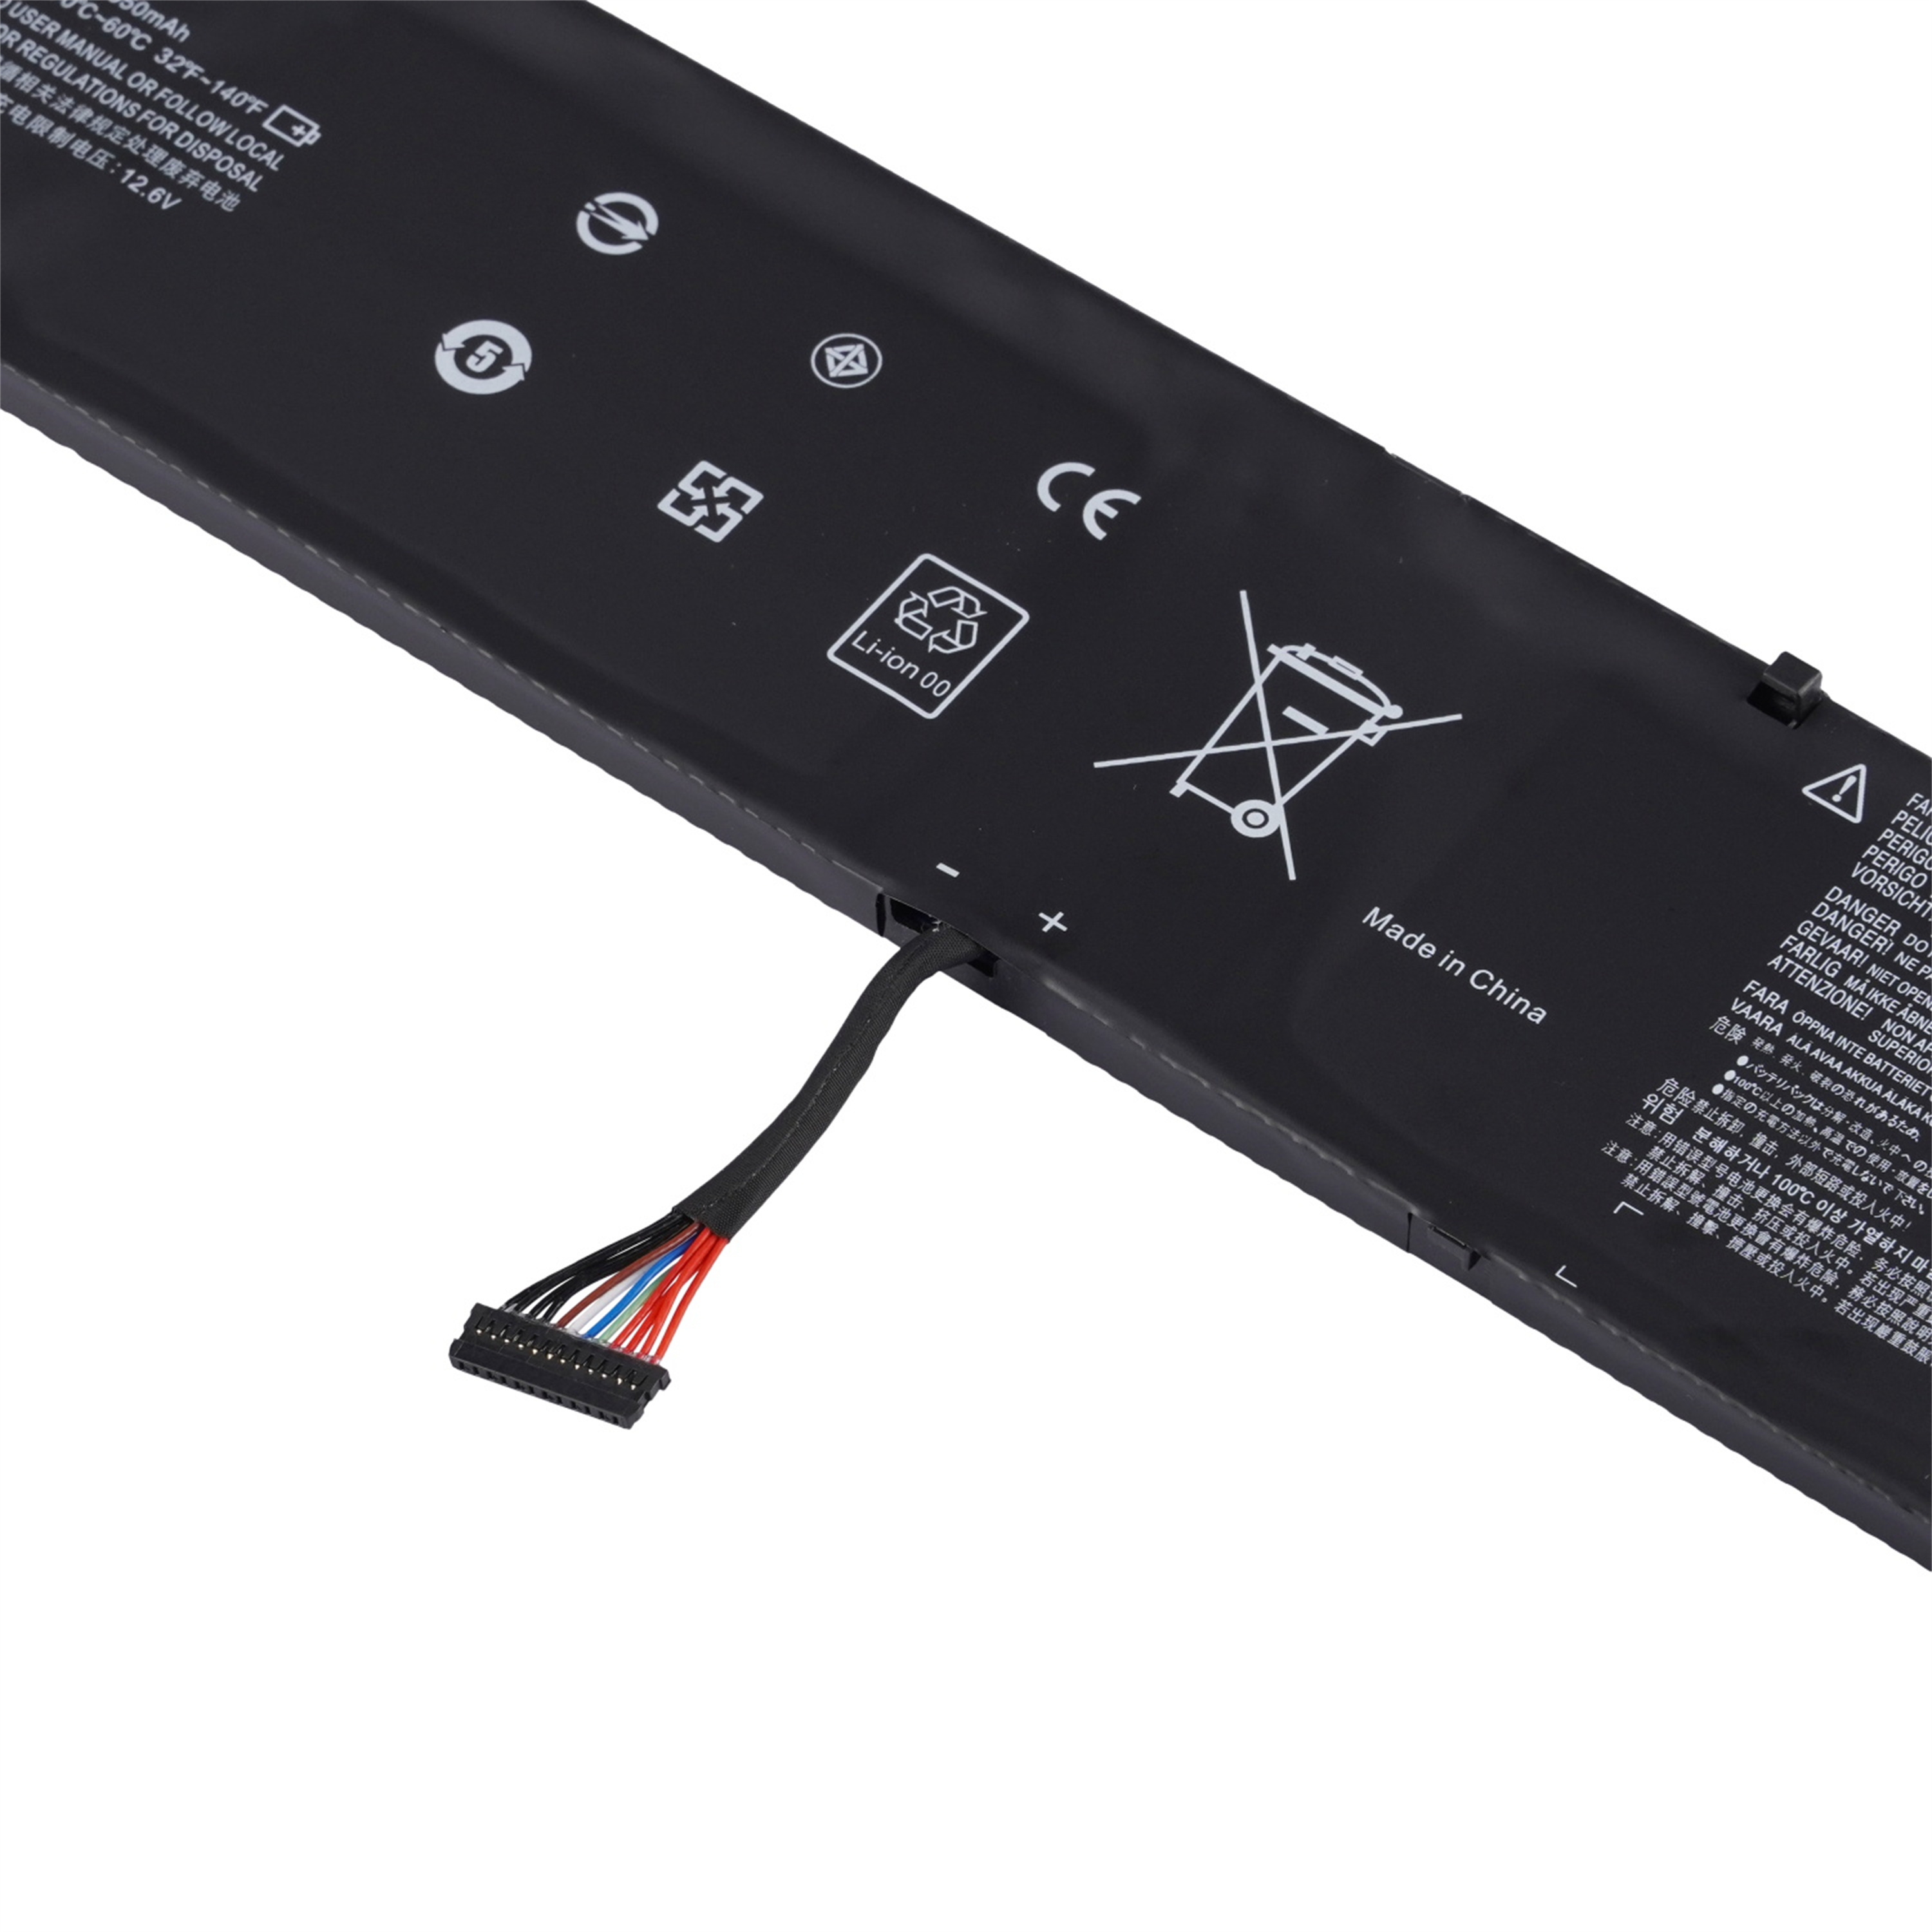 L14M3P24 rechargeable lithium ion Notebook battery Laptop battery For with Lenovo 拯救者R720 拯救者R720-15 拯救者R720-15IKB 拯救者R720-15IKBN 拯救者R720-15IKBM XiaoXin 700 XiaoXin 700-15ISK ideapad 700-15isk